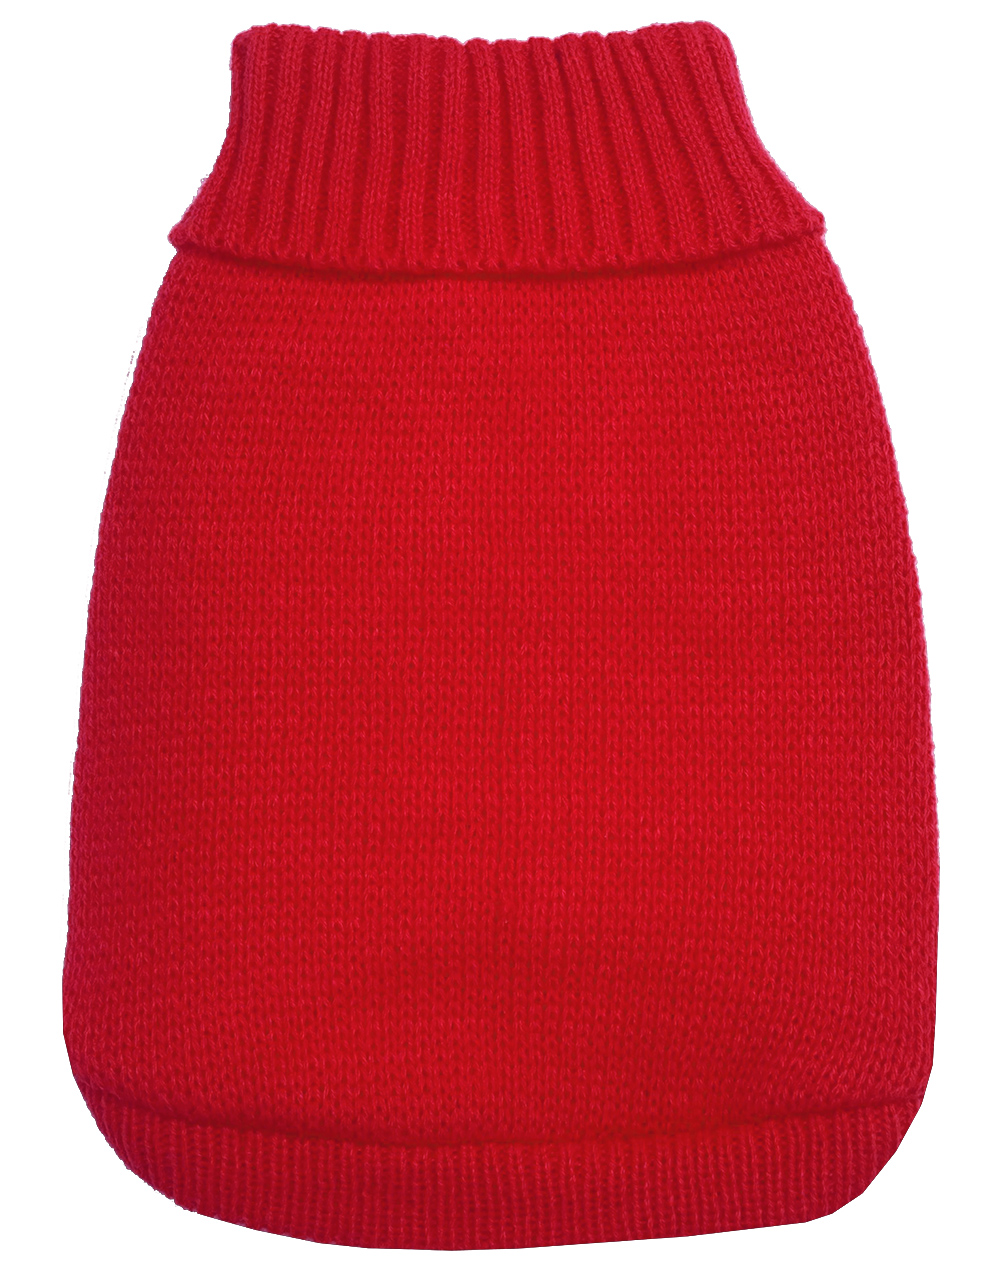 Knit Pet Sweater Red Size 6X